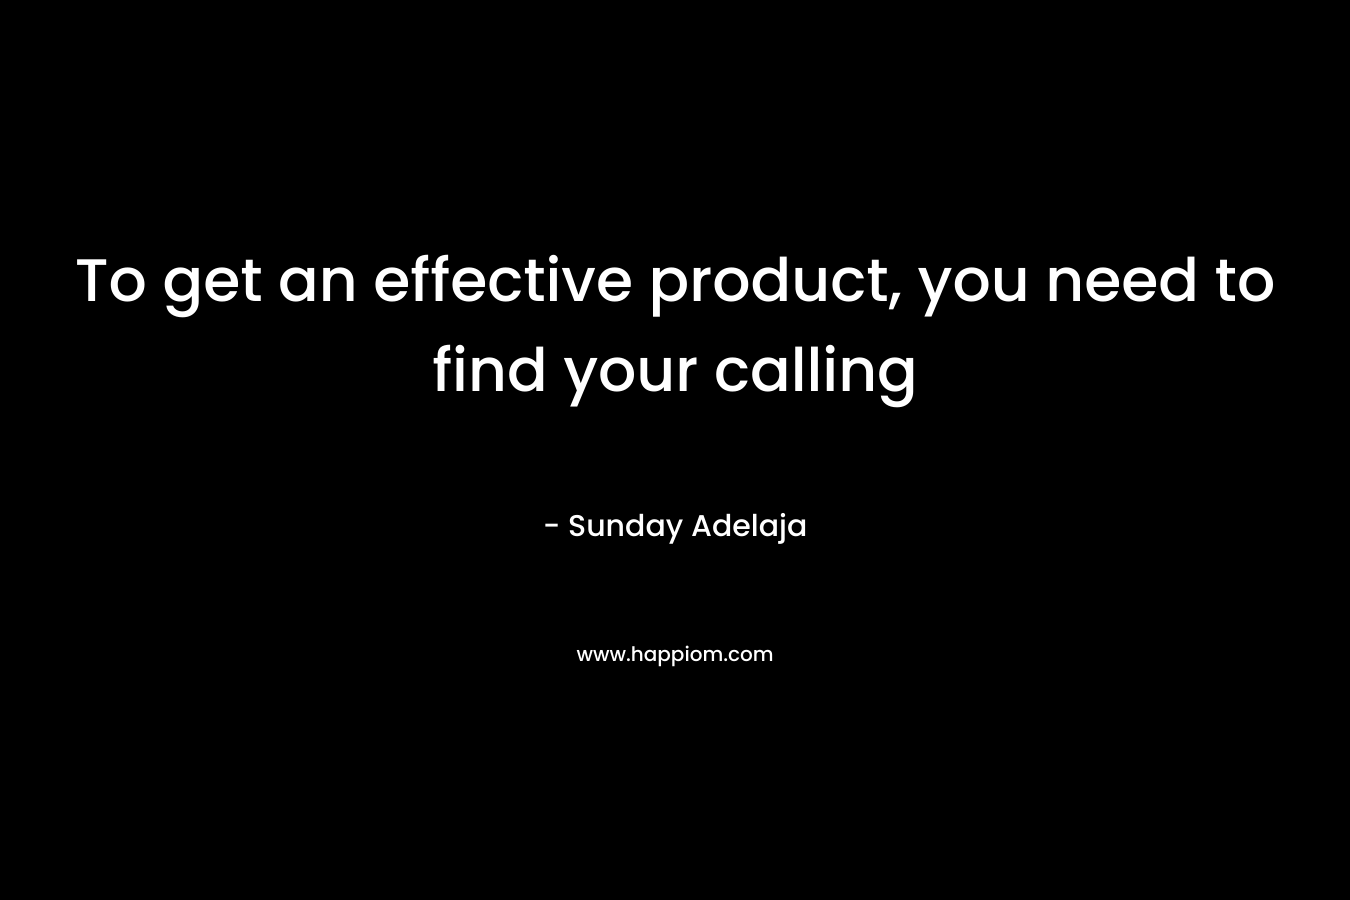 To get an effective product, you need to find your calling